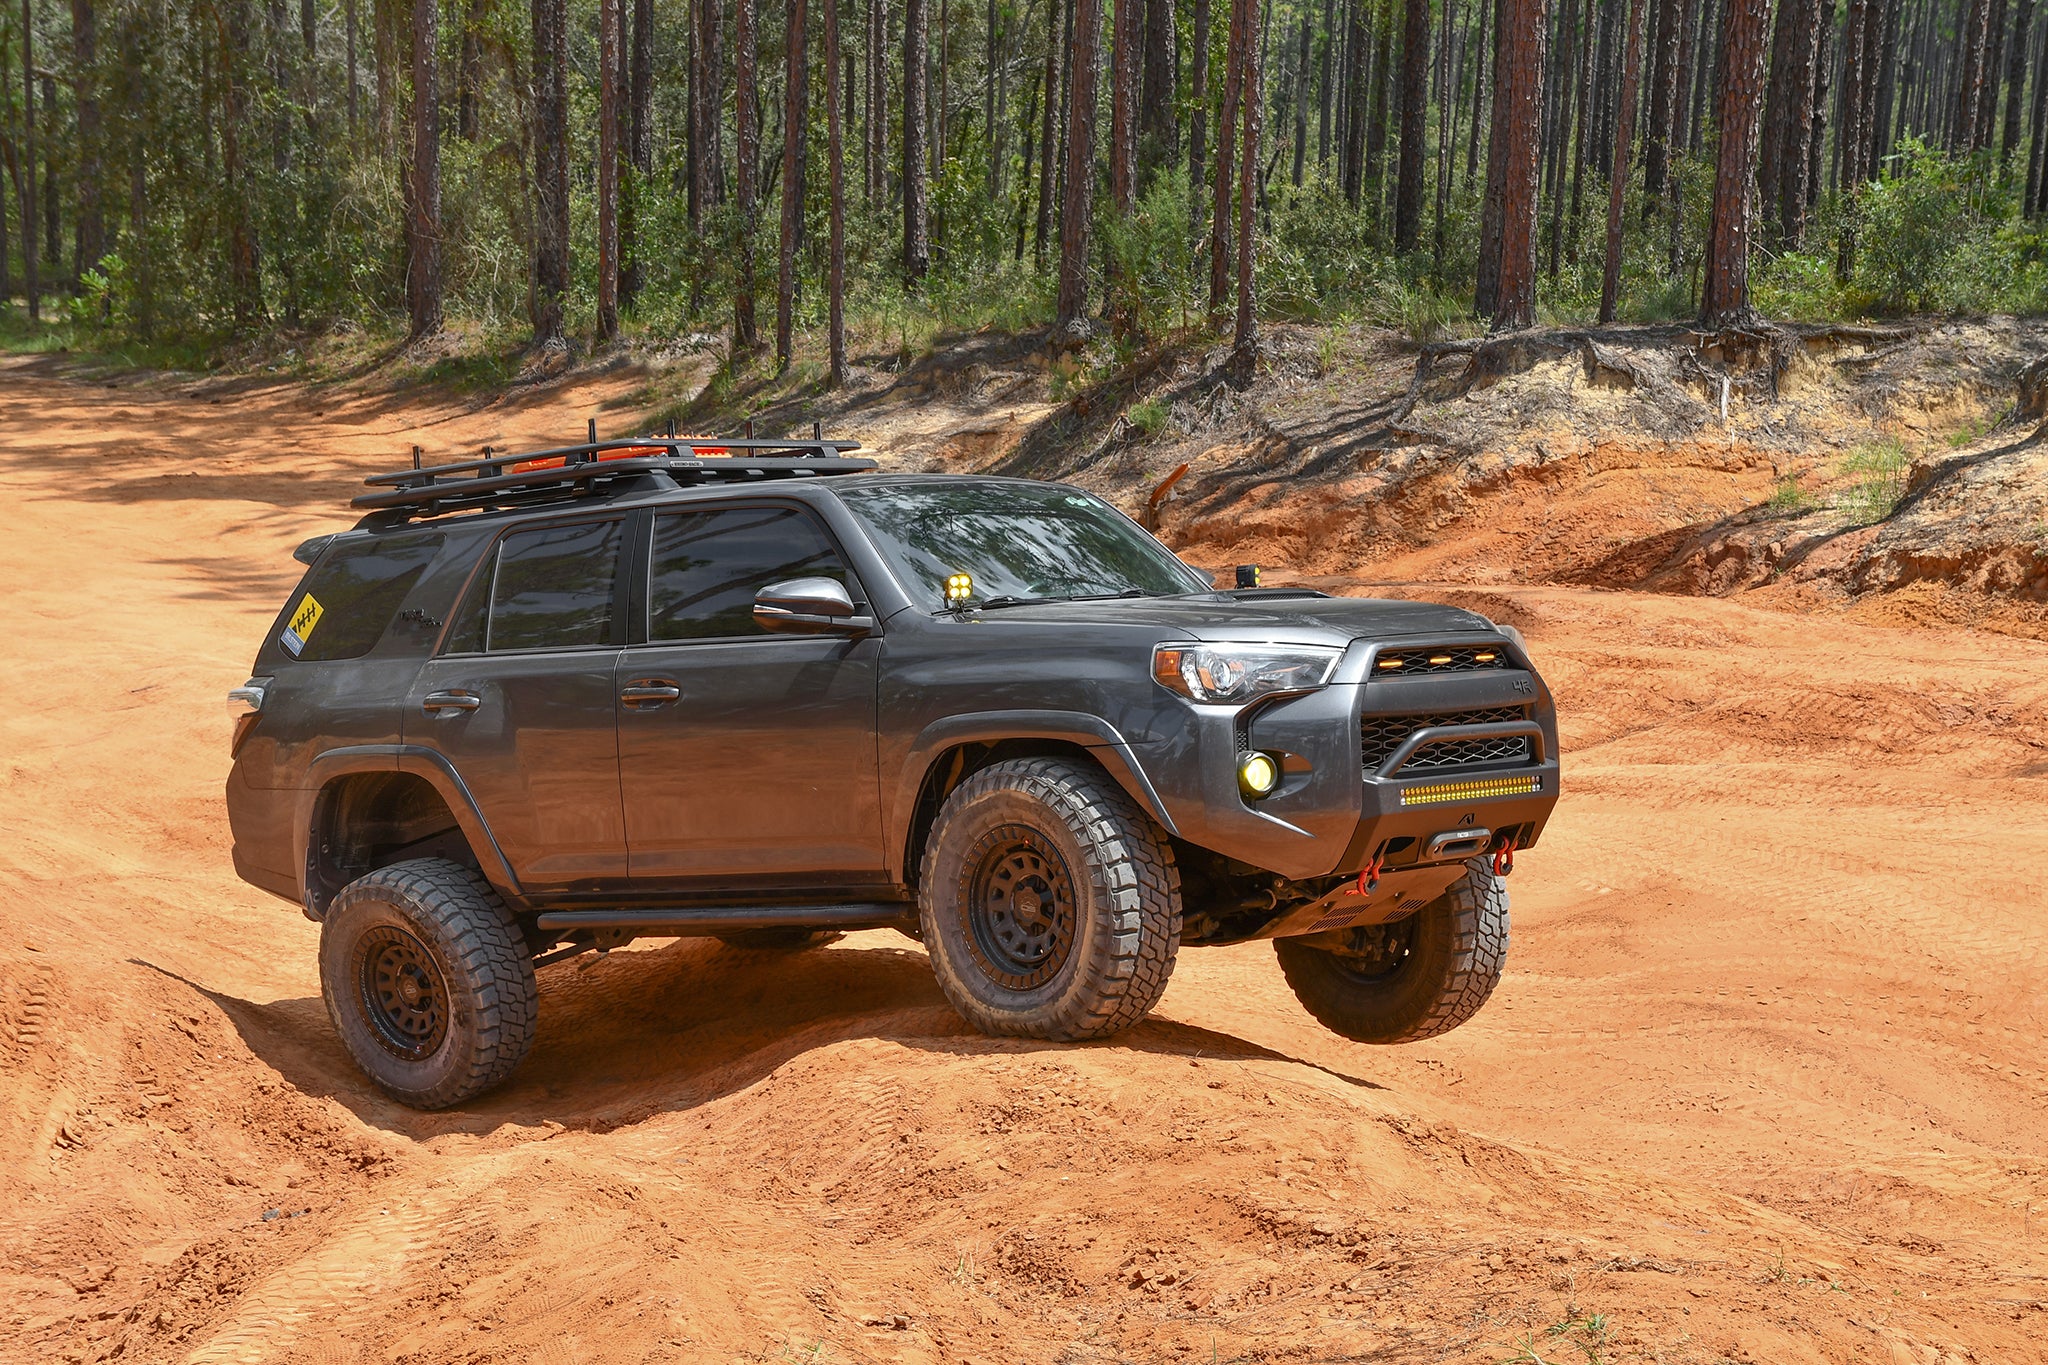 overland sector wheels toyota 4runner trd off-road on 17x9 satin black venture wheels on red dirt clay trail in woods